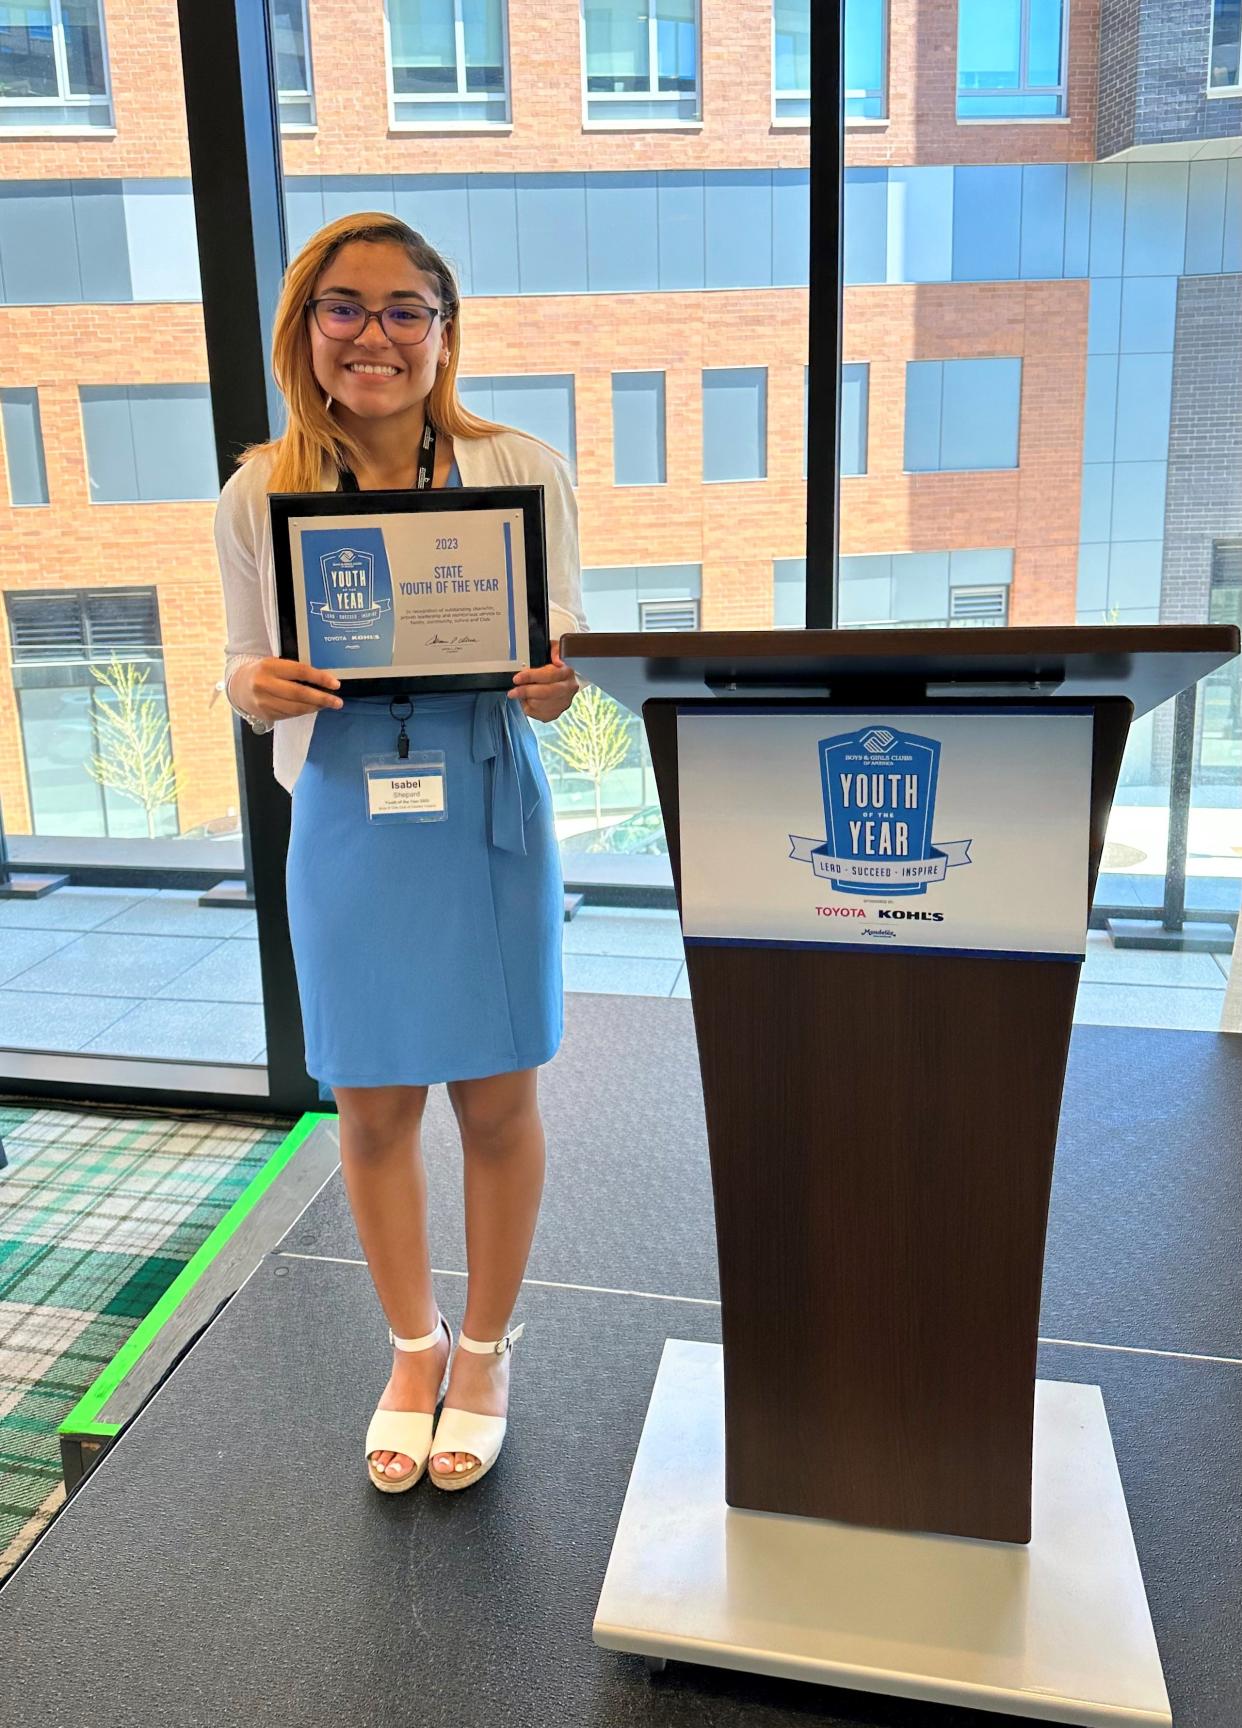 Isabel Shepard, a senior at West Ottawa High School, was named Michigan’s Boys & Girls Club Youth of the Year during a ceremony in Lansing on Thursday, April 27.